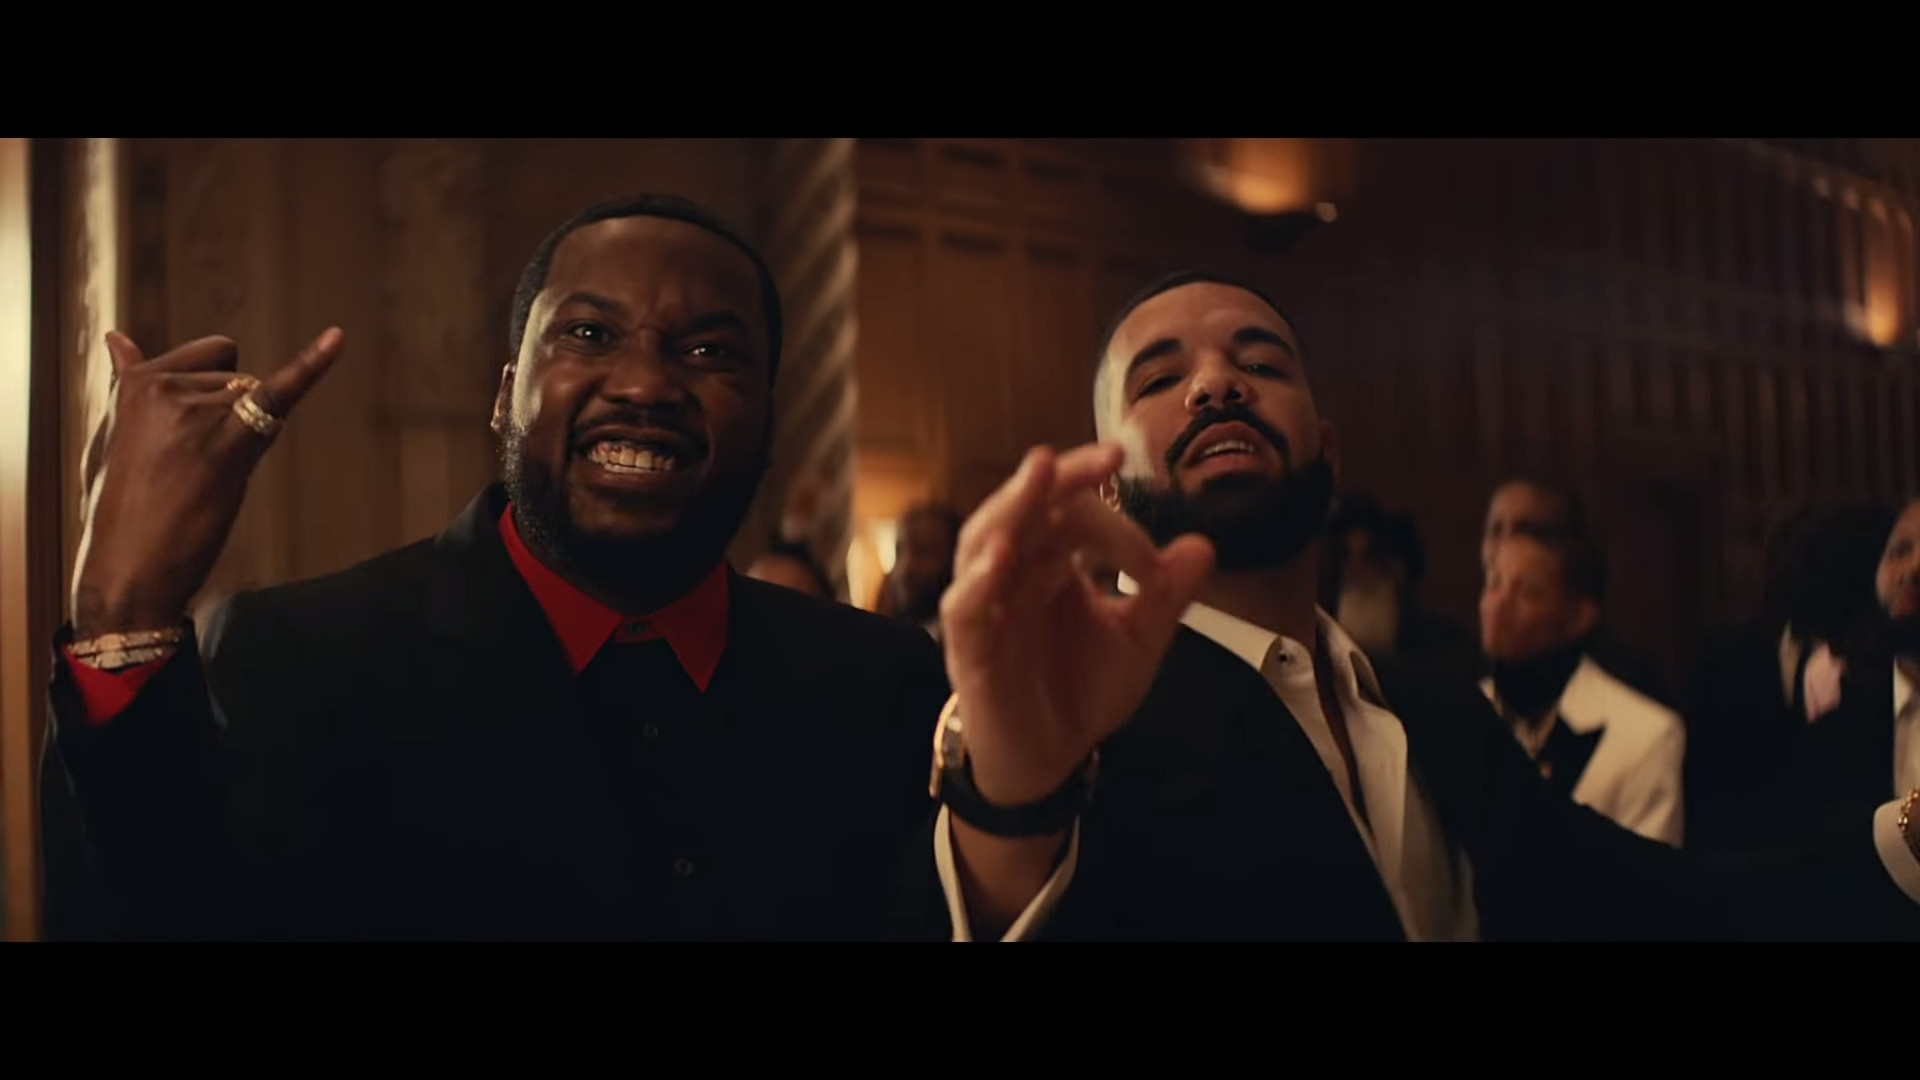 1920x1080 Meek Mill and Drake release "Going Bad" video